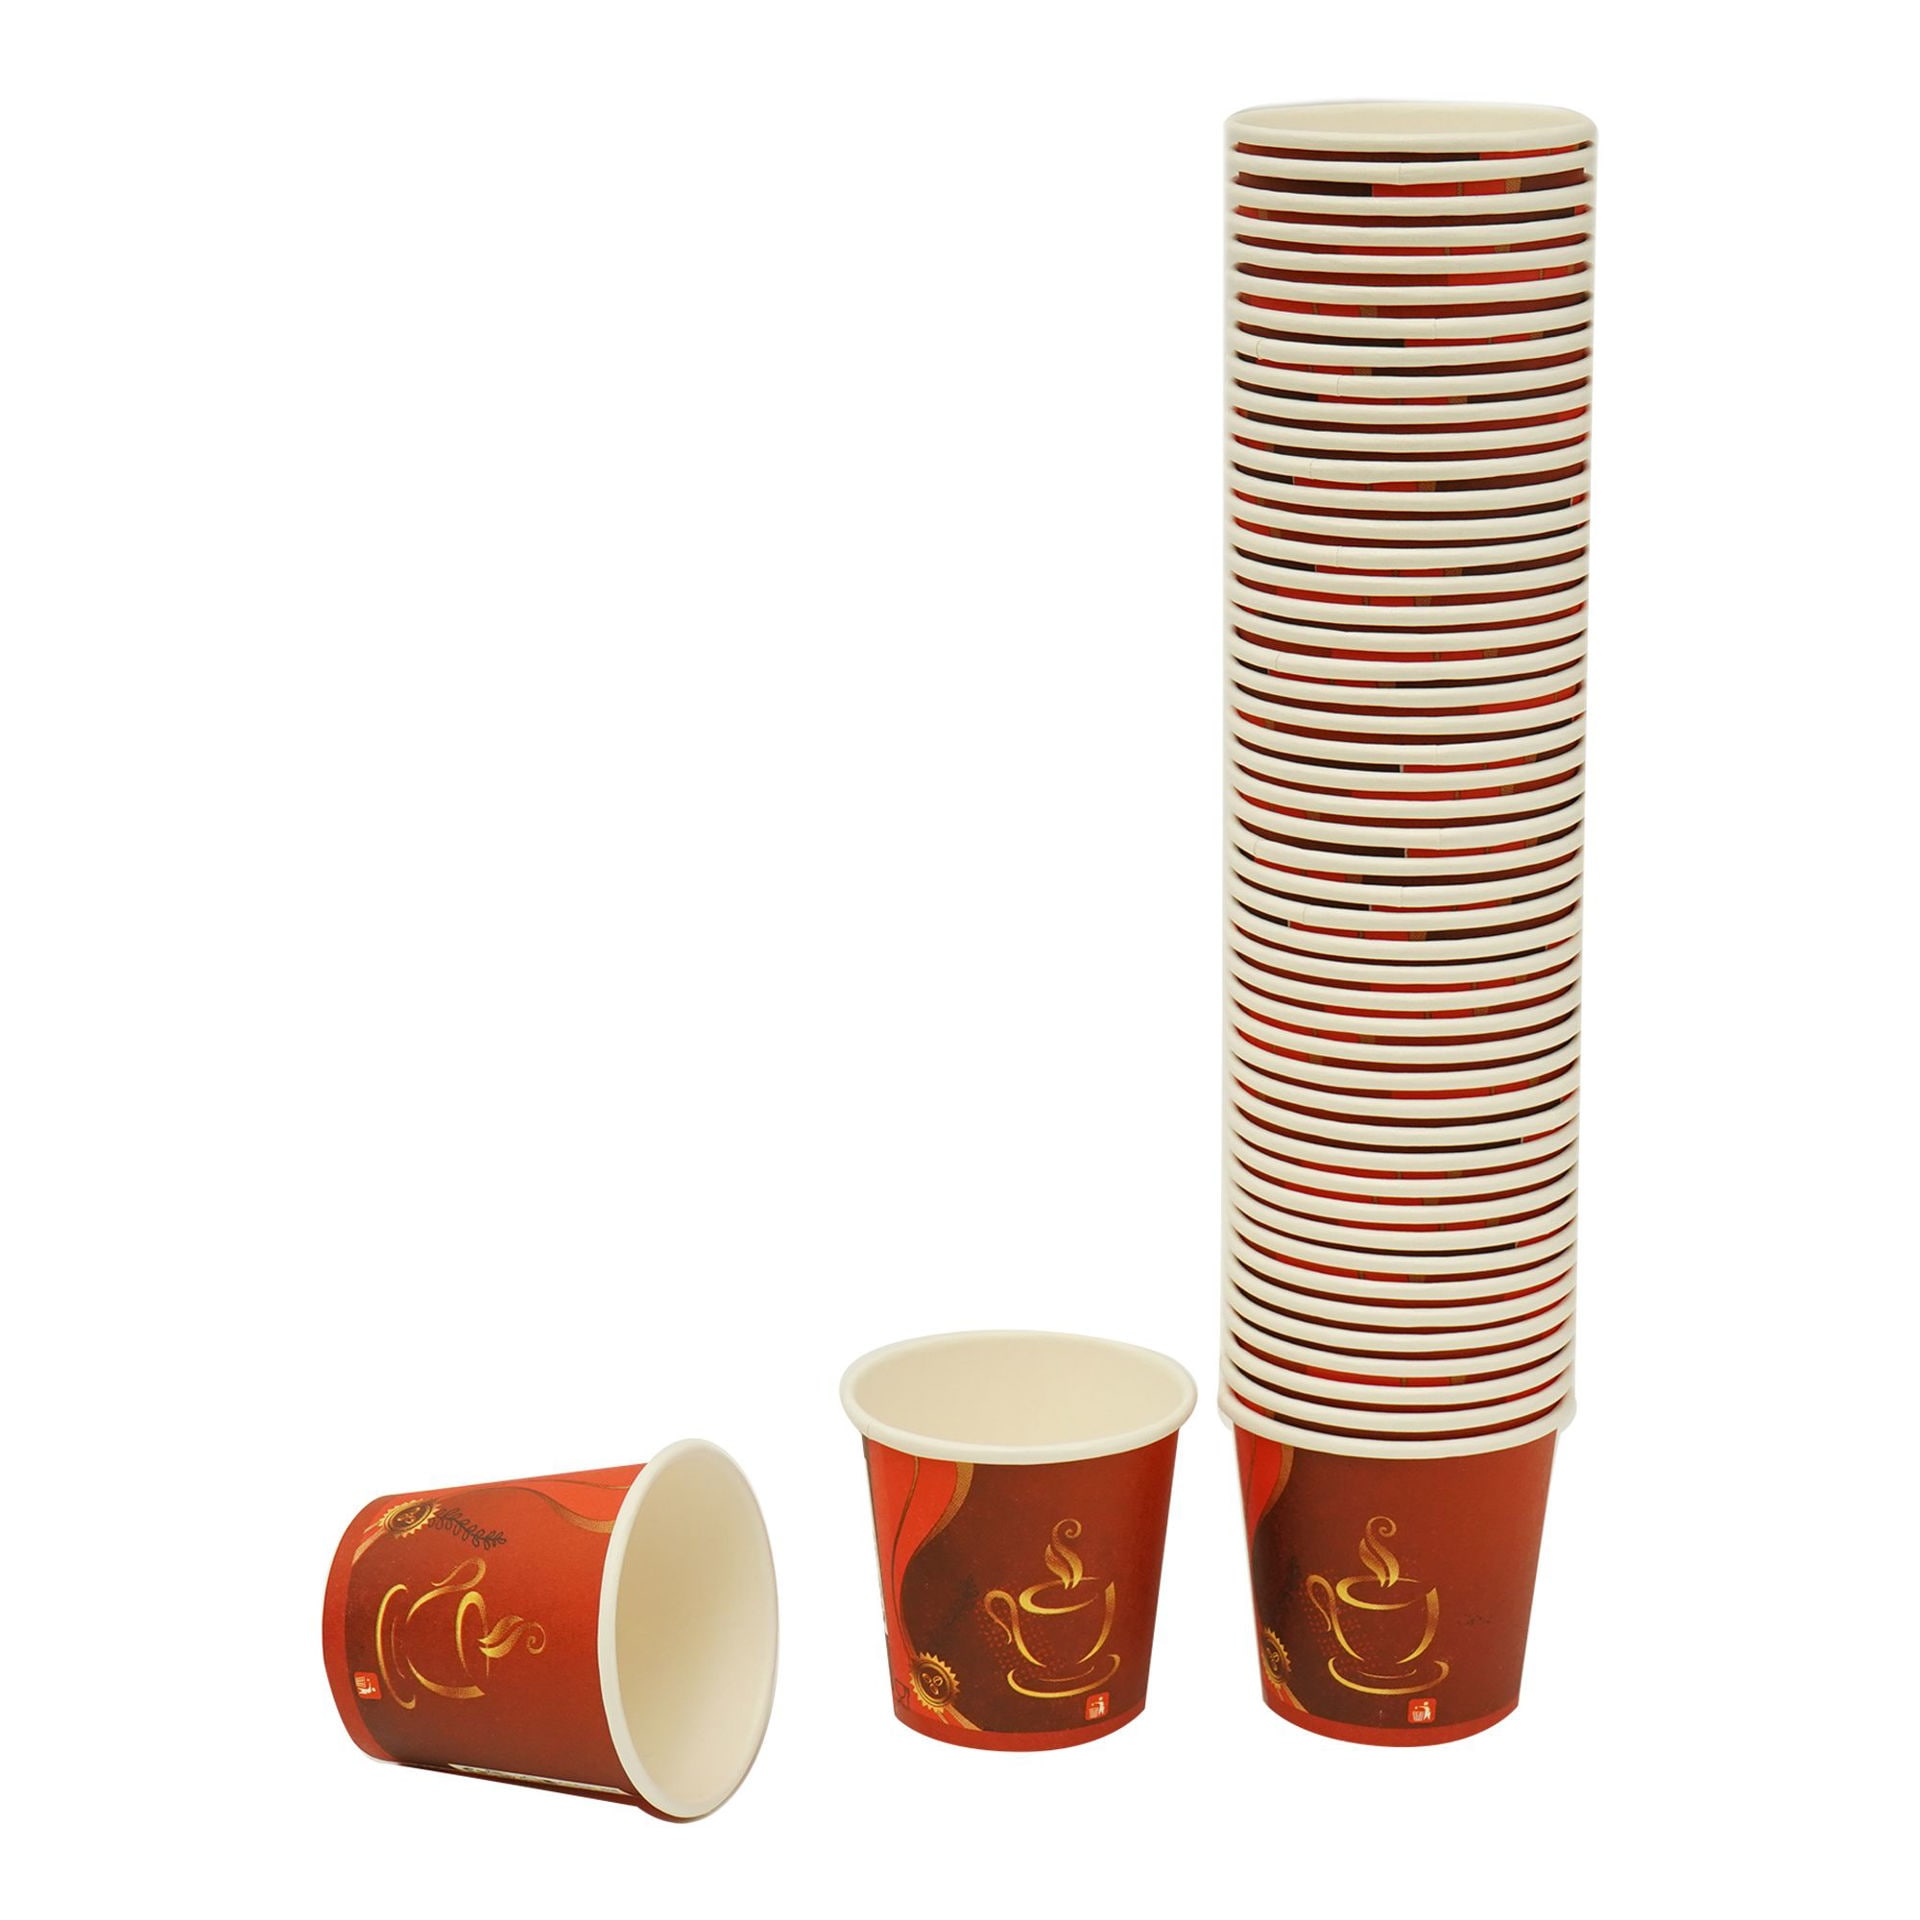 Shop IDEAL PACK Ideal Pack Disposable Paper Cups, 4oz, Pack of 50pcs, Red